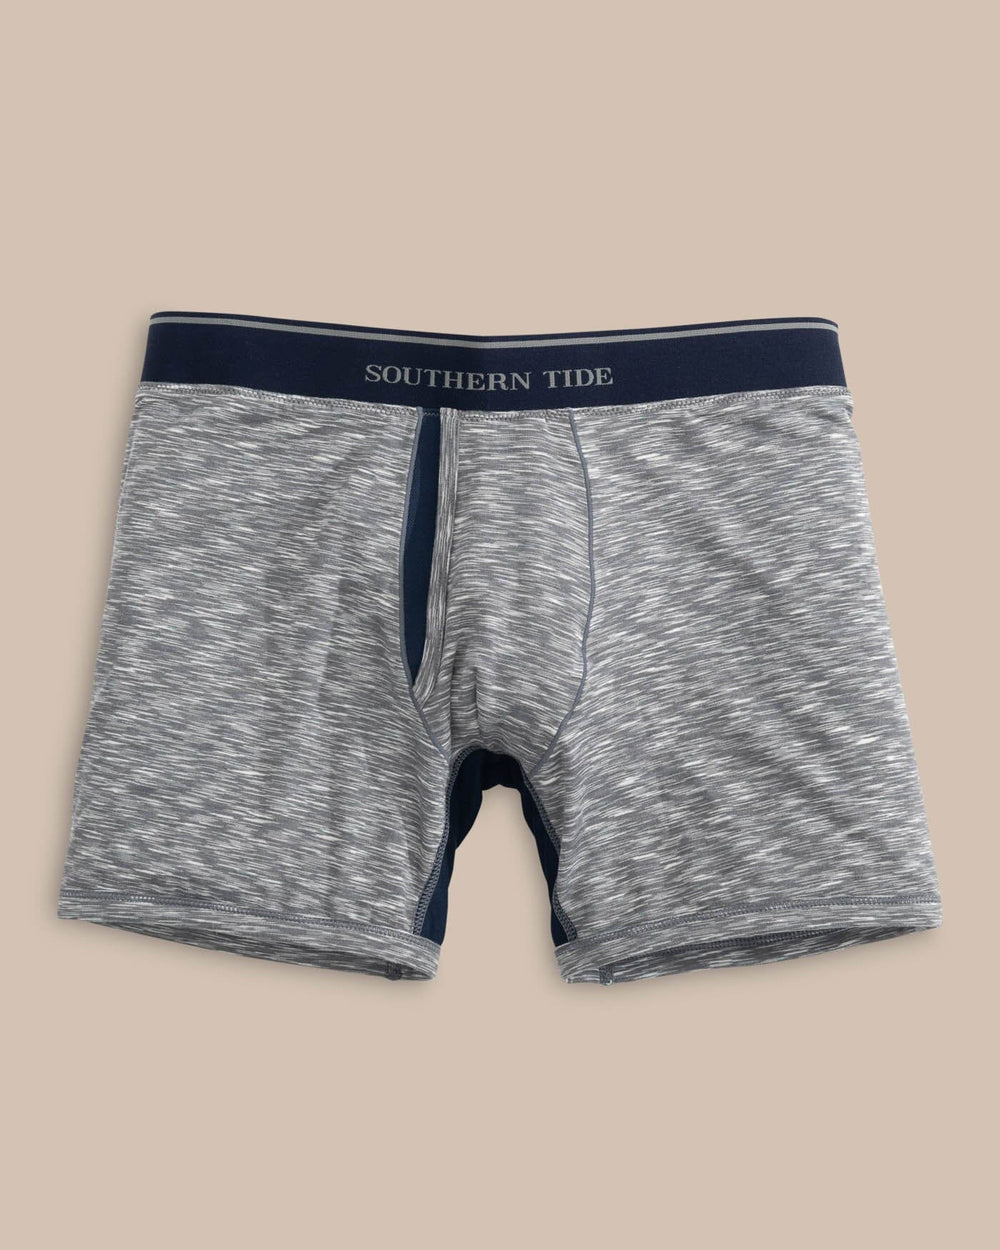 The front of the Men's Baxter Boxer Brief by Southern Tide - Smoked Pearl